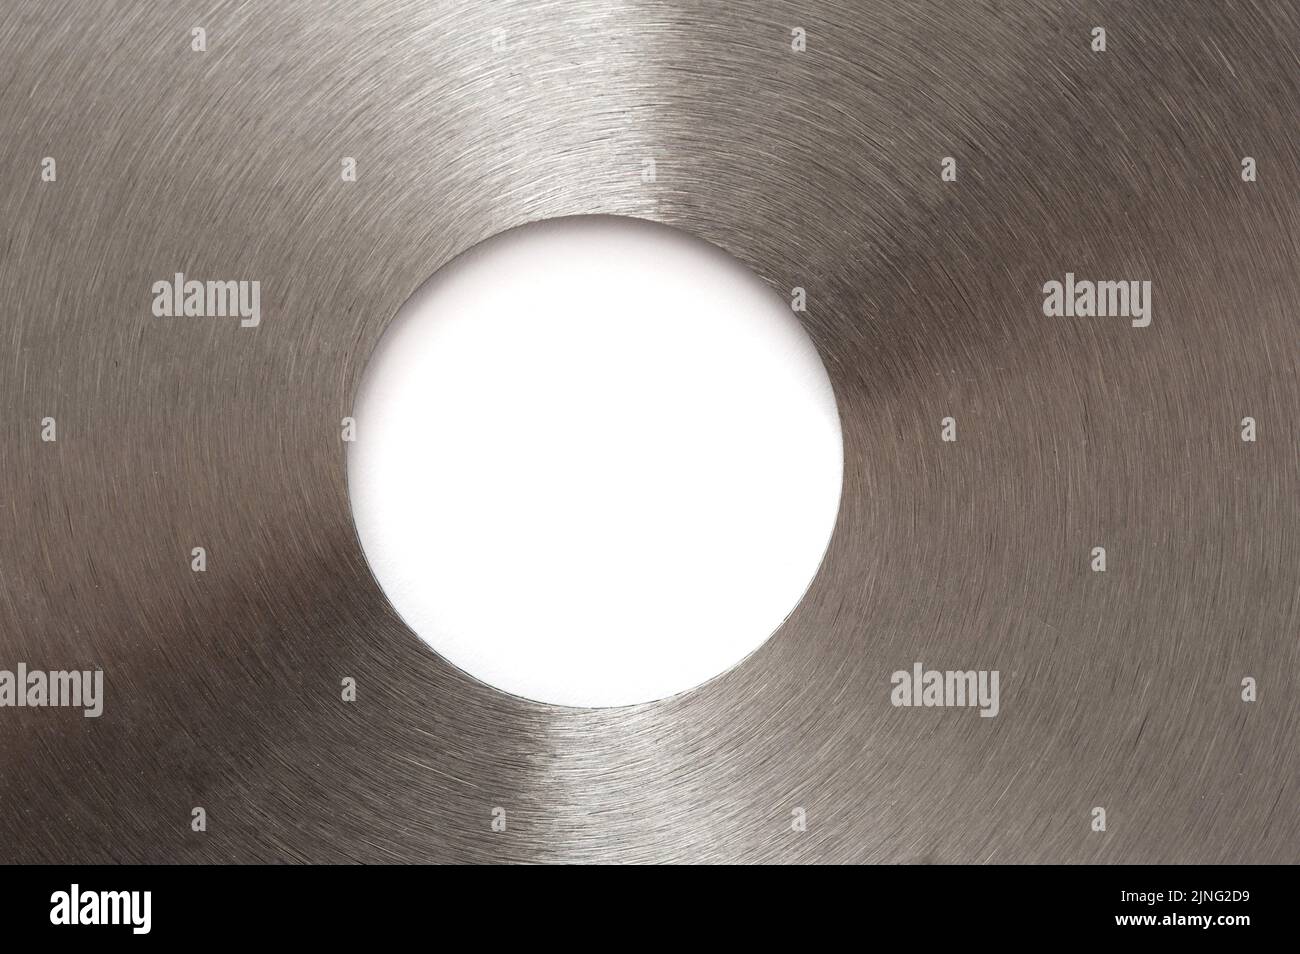 A close up of a metal, stainless steel saw blade and center circle with white copy space in the middle. Stock Photo